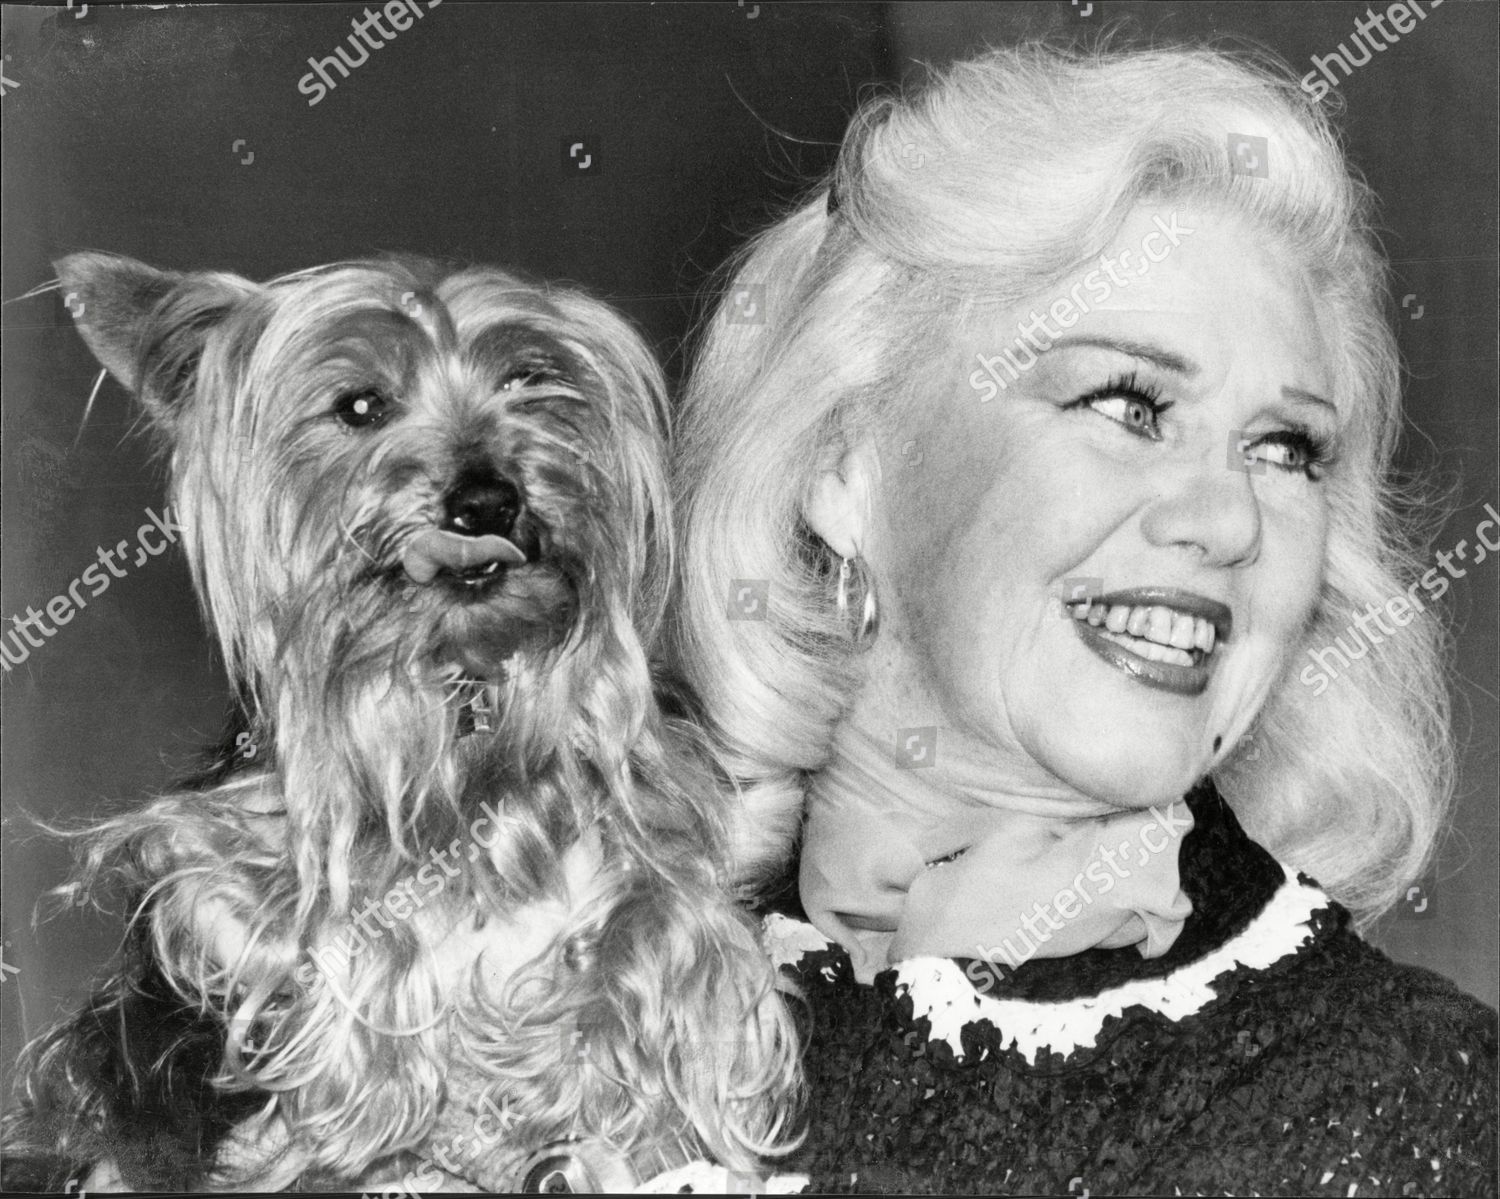 https://editorial01.shutterstock.com/wm-preview-1500/2776157a/4fb9070a/actress-ginger-rogers-with-her-pet-yorkshire-terrier-sampson-in-london-ginger-rogers-born-virginia-katherine-mcmath-july-16-1911-oo-april-25-1995-was-an-american-actress-dancer-and-singer-who-appeared-in-film-and-on-stage-radio-and-television-thro-shutterstock-editorial-2776157a.jpg